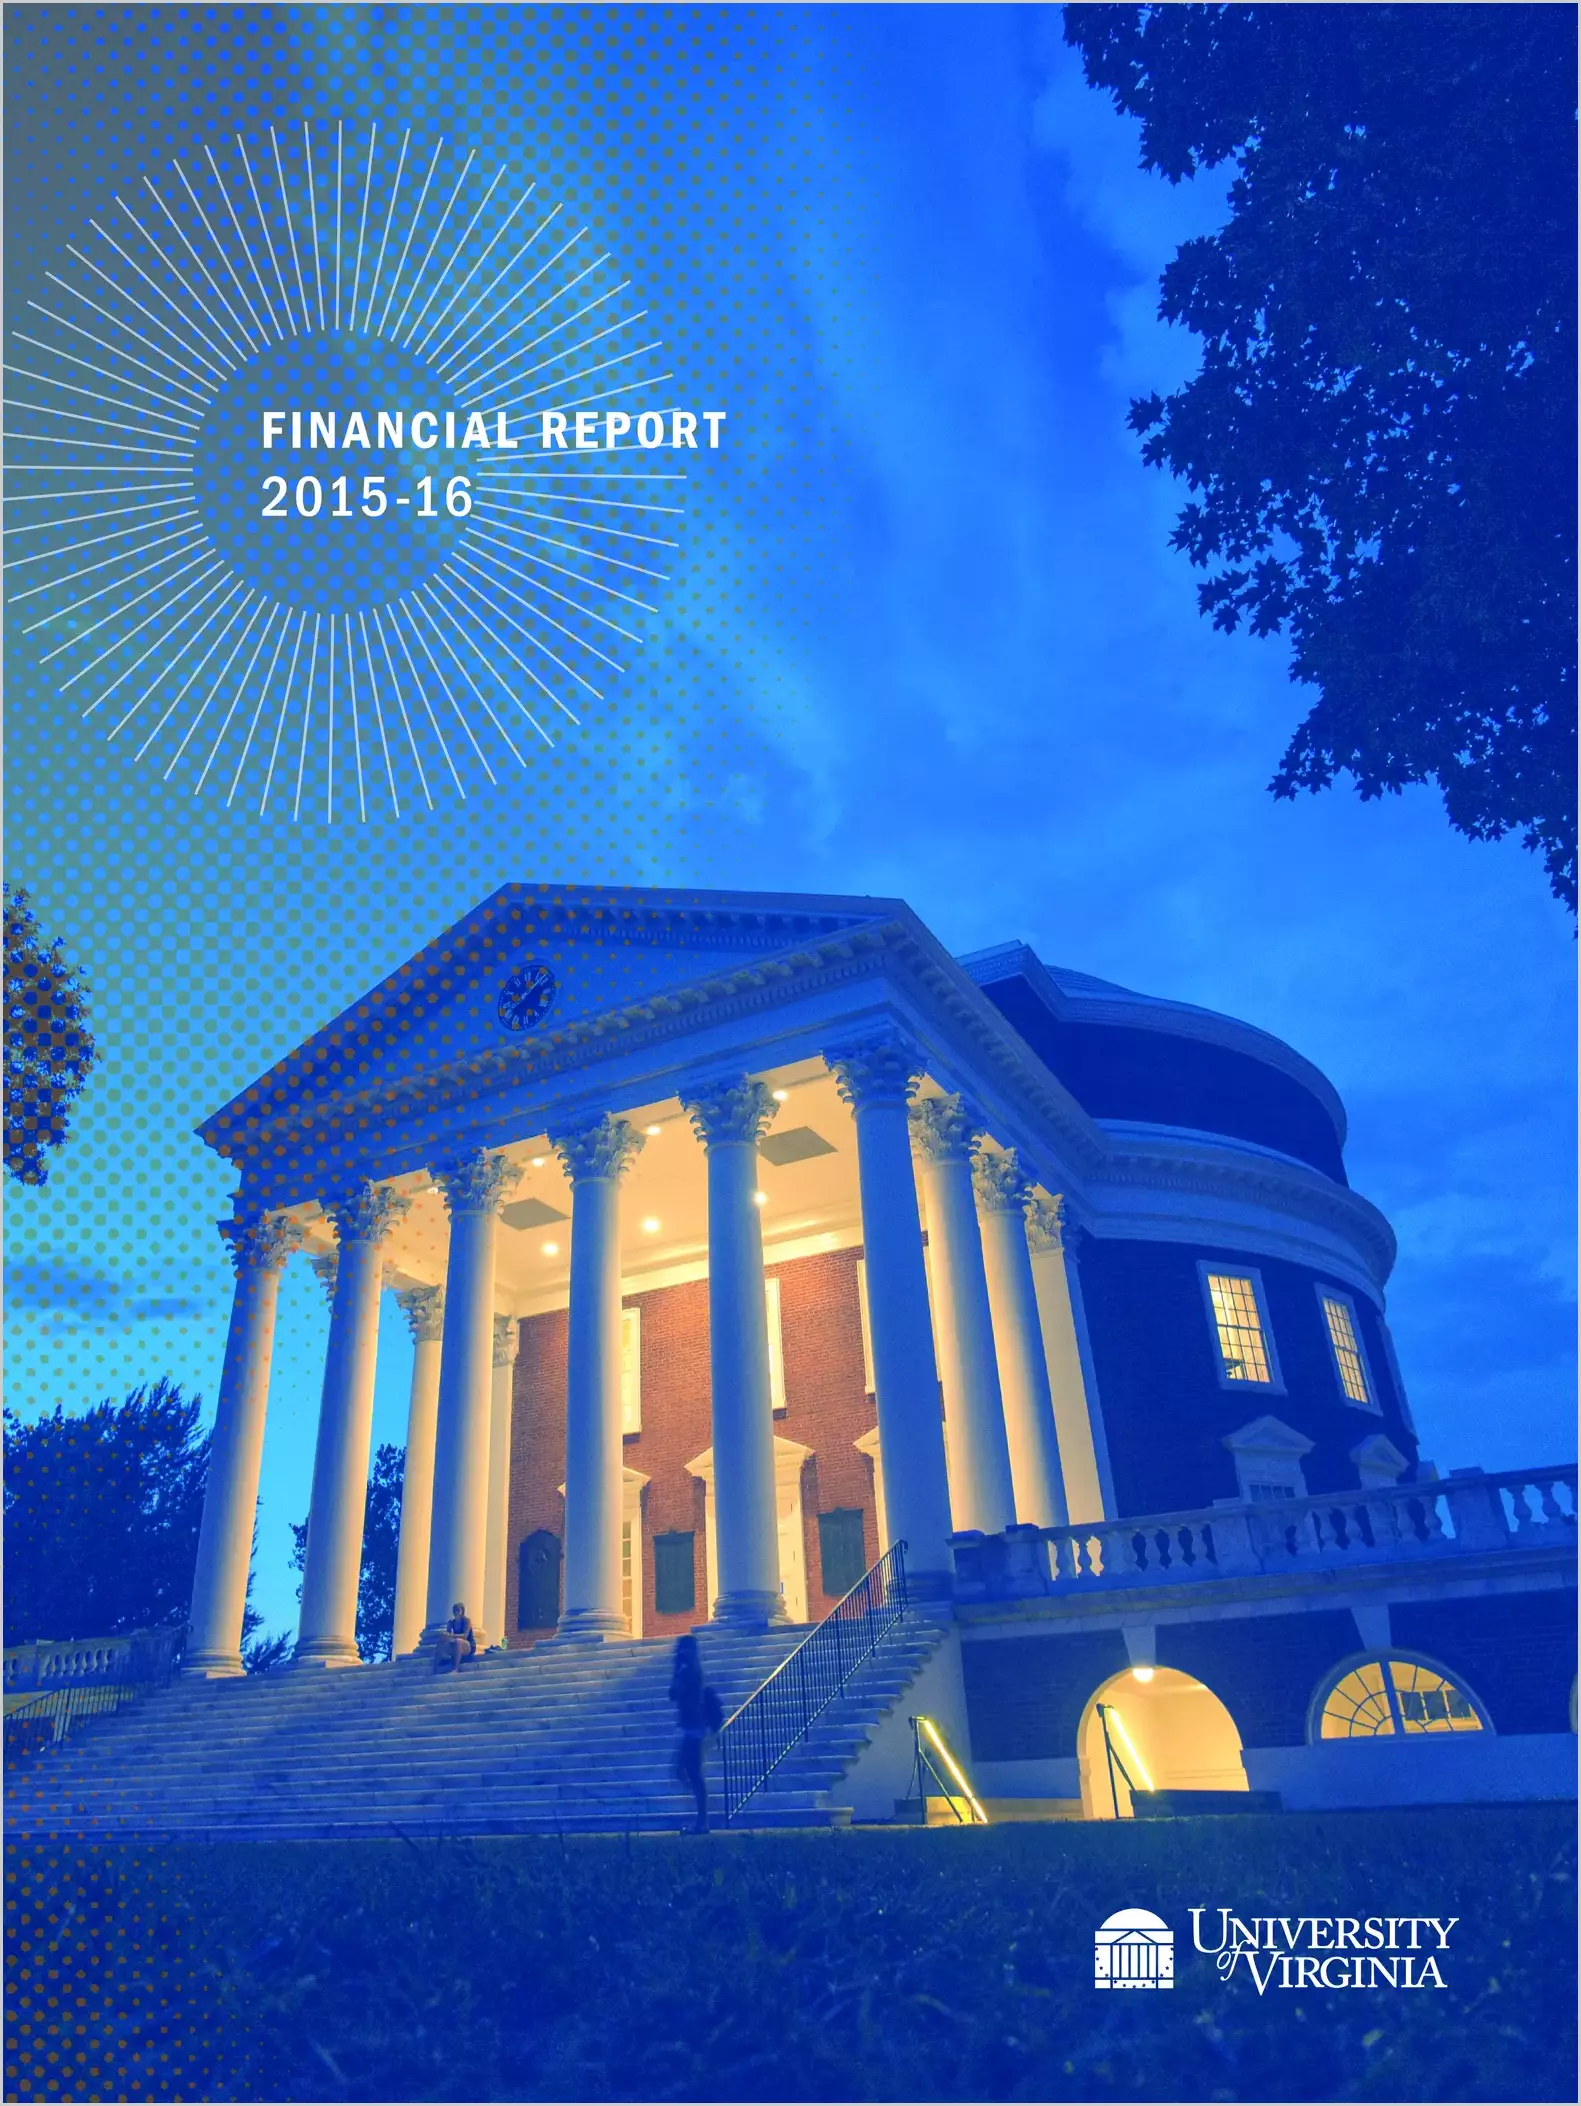 University of Virginia Financial Statements for the year ended June 30, 2016